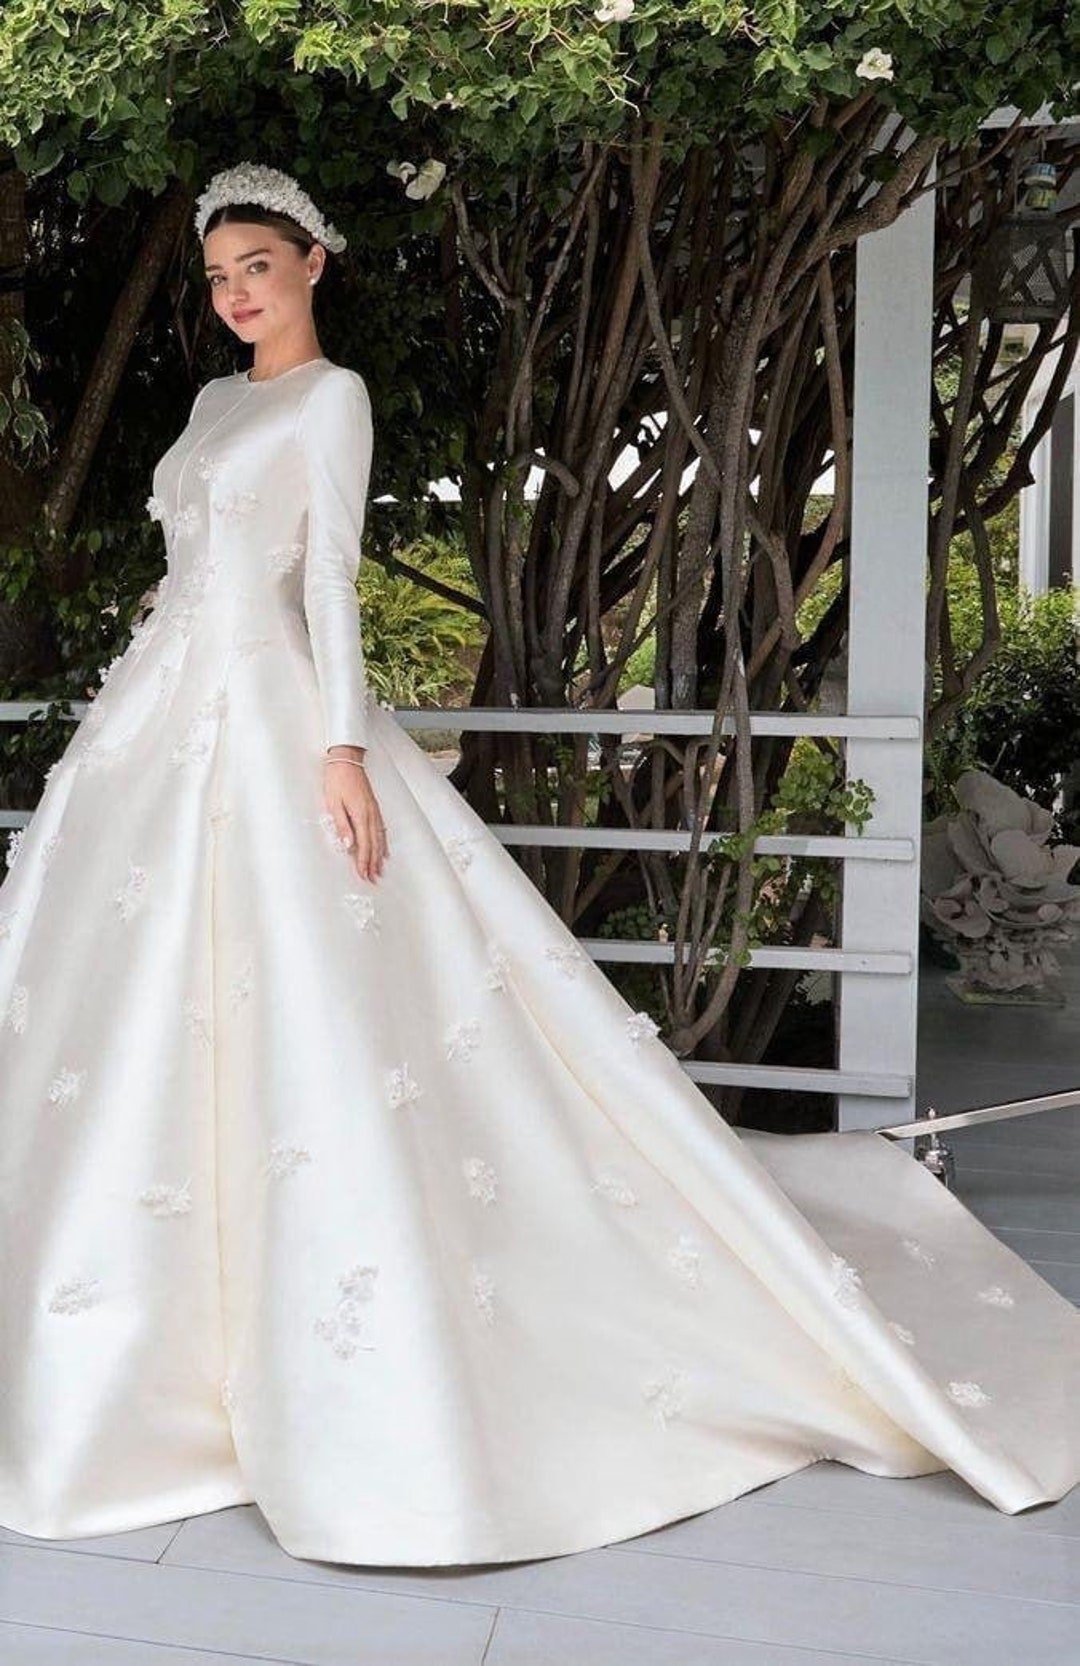 Miranda Kerrs wedding gown to go on display at Dior exhibition  Wedding  dresses Celebrity wedding gowns Wedding dresses photos